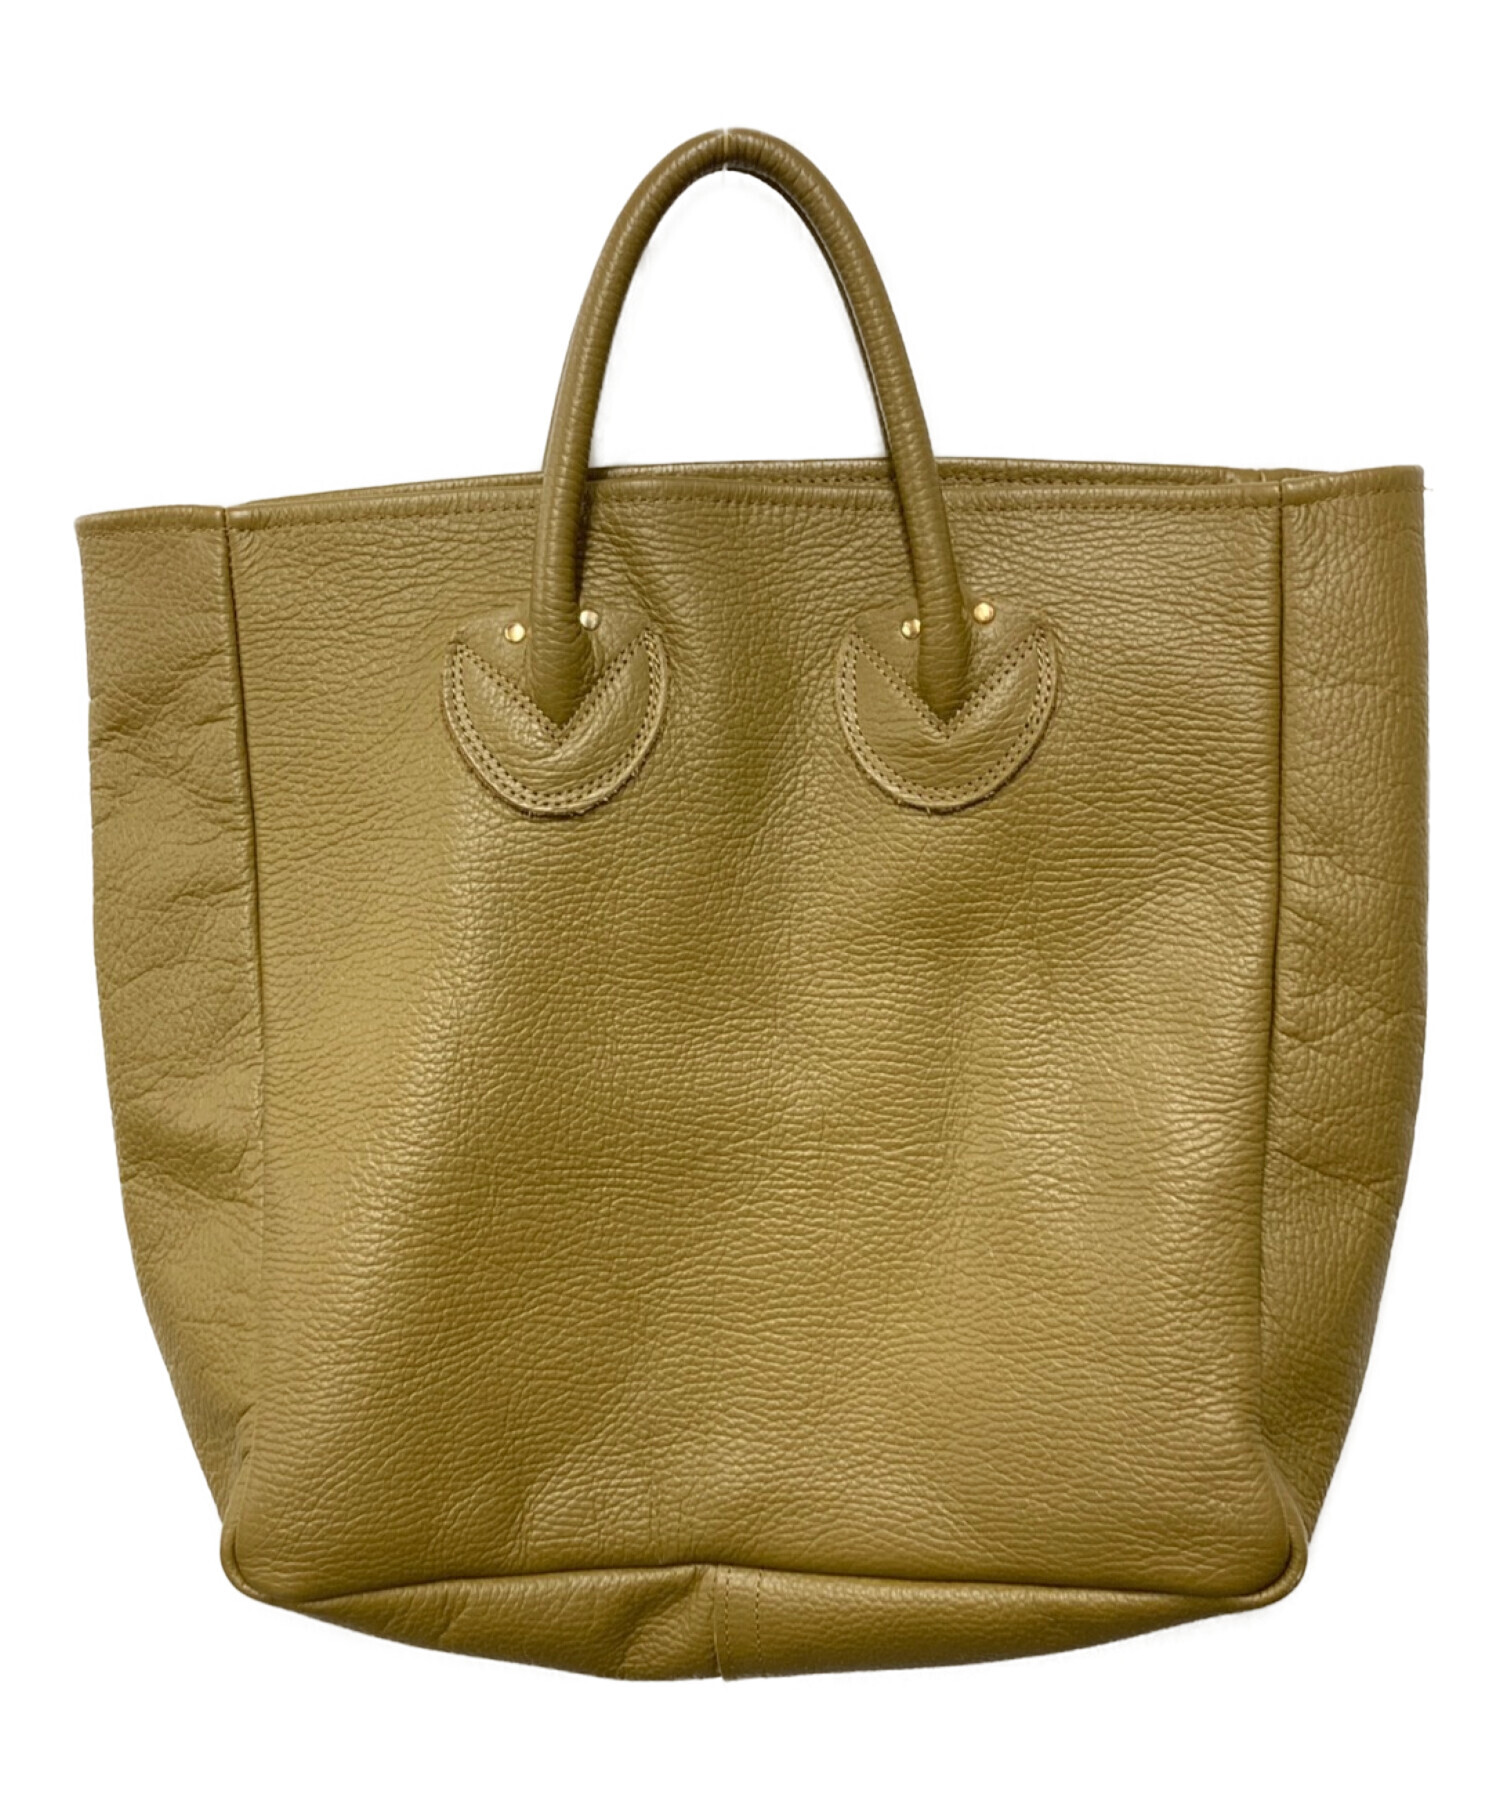 YOUNG & OLSEN The DRYGOODS STORE (ヤングアンドオルセン ザ ドライグッズストア) EMBOSSED LEATHER  TOTE M レザートートバッグ ブラウン サイズ:‐